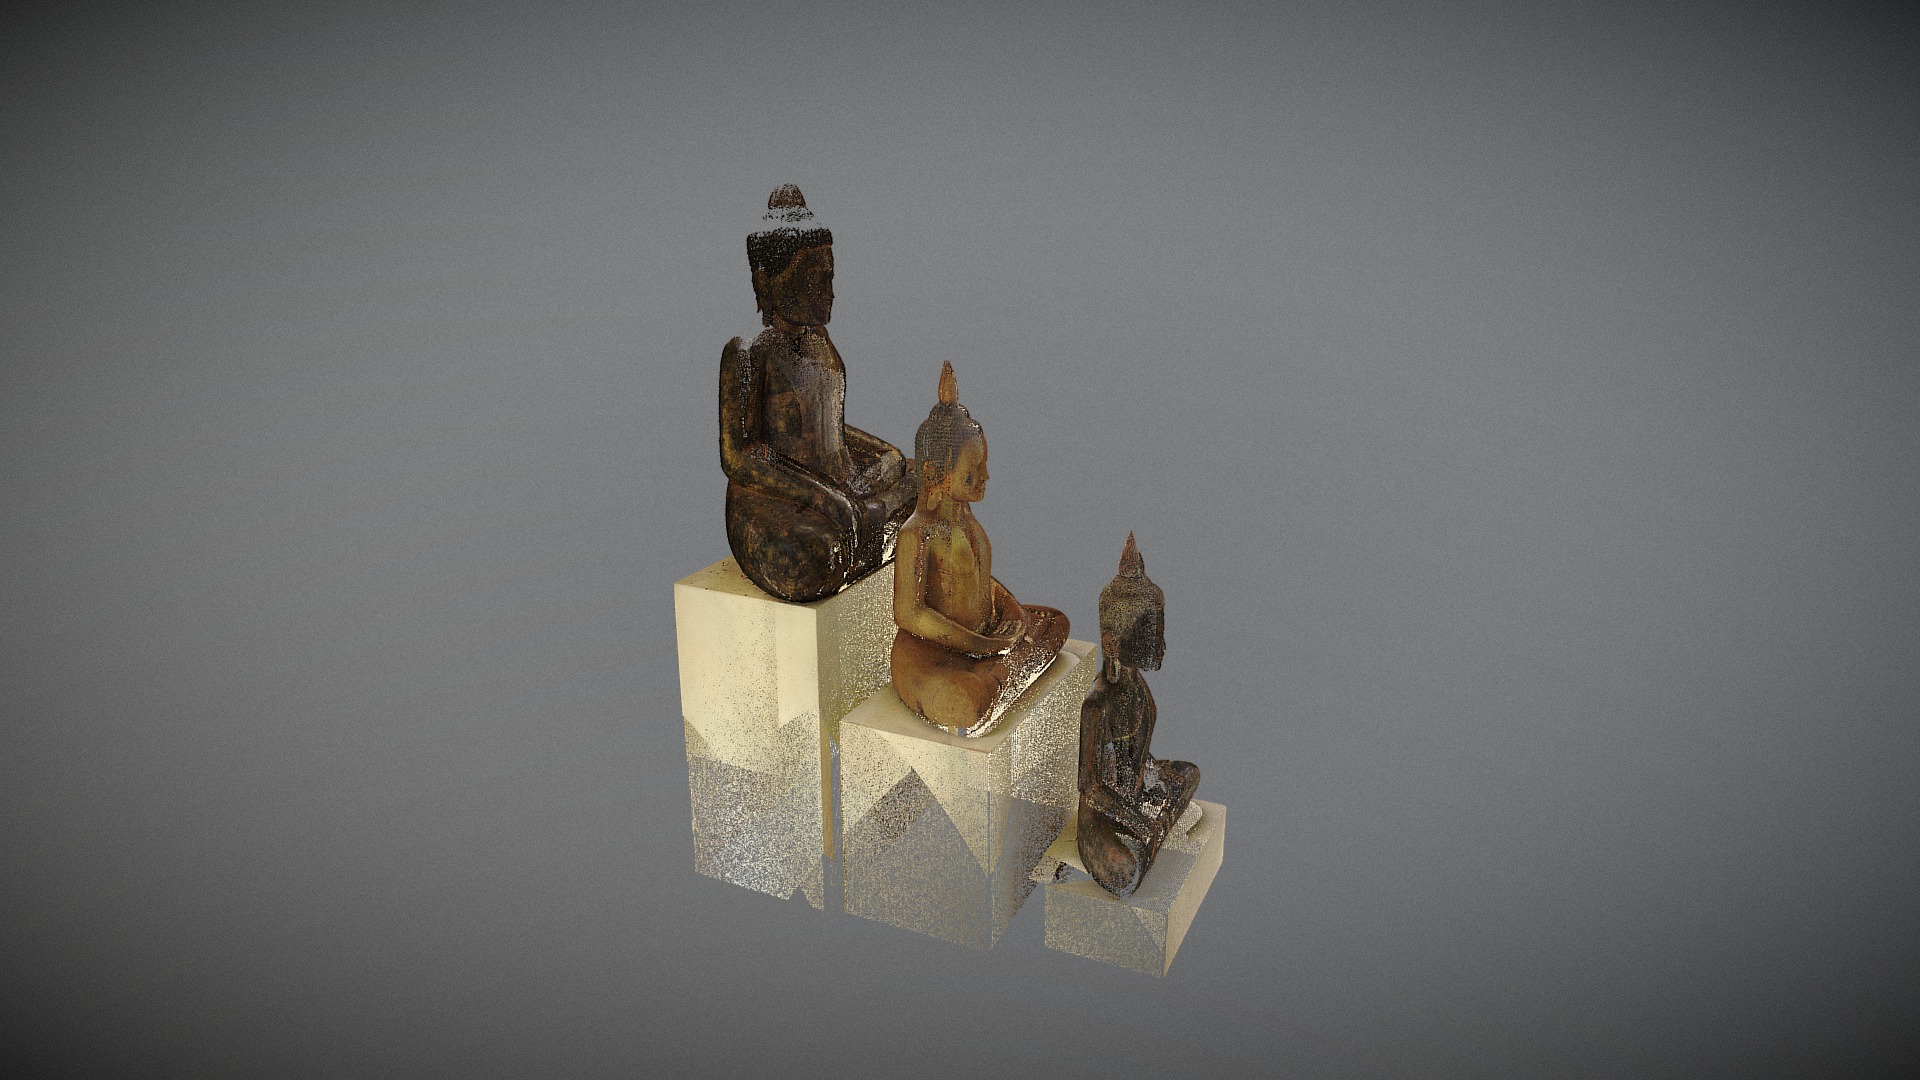 3D model 3D Statue model point cloud - This is a 3D model of the 3D Statue model point cloud. The 3D model is about a stone sculpture of a man and a woman.